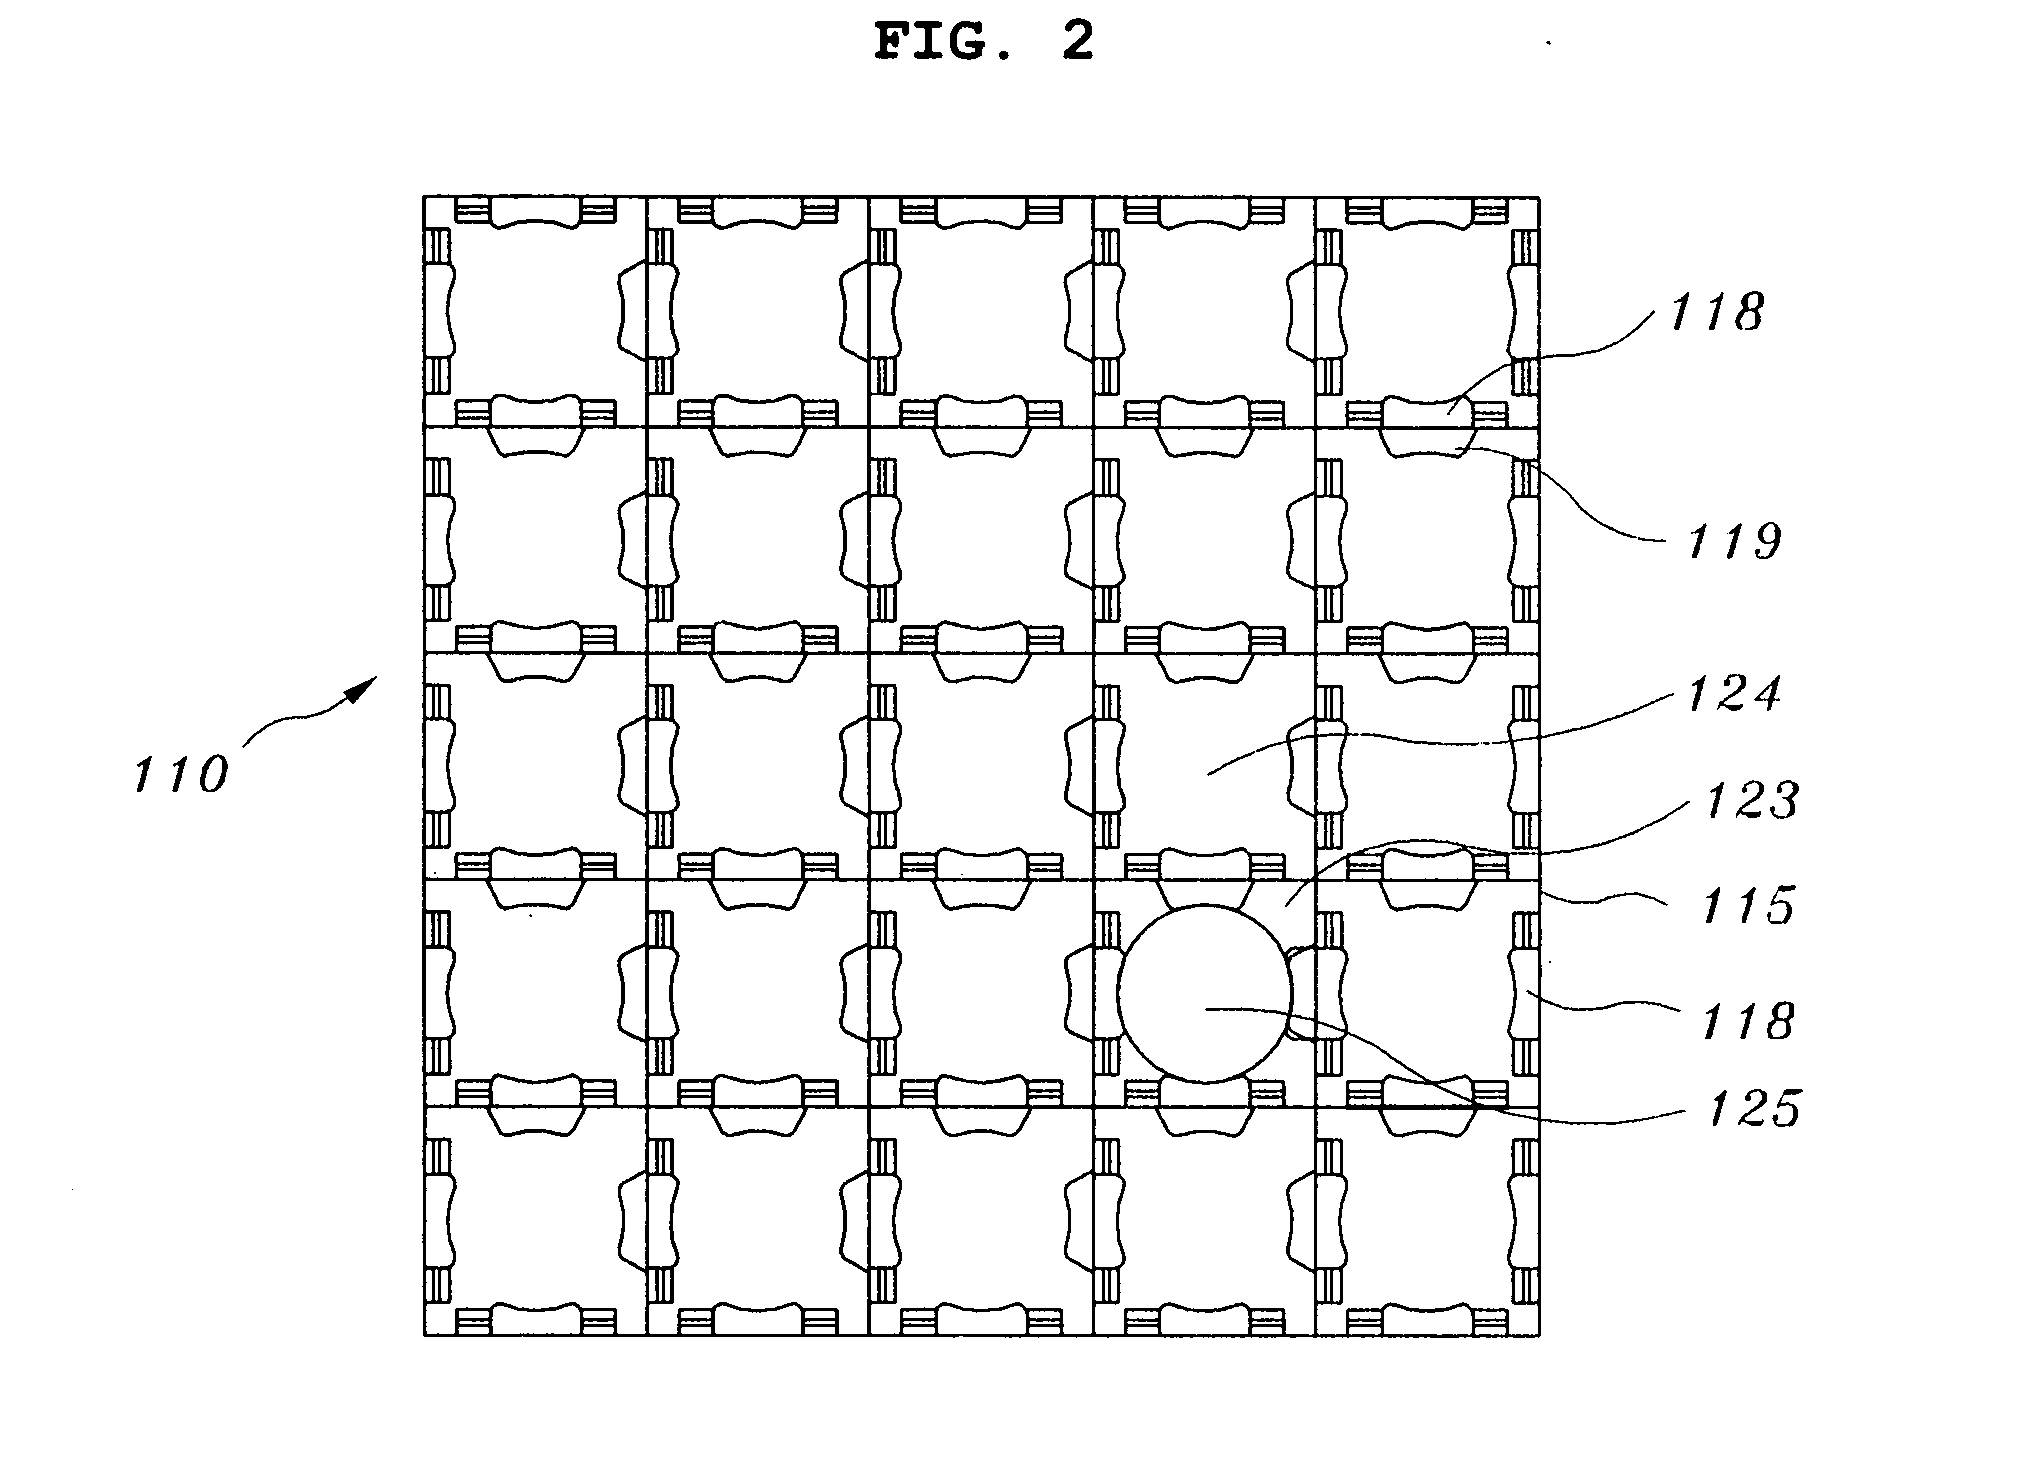 Spacer grid spring for increasing the conformal contact area with fuel rod